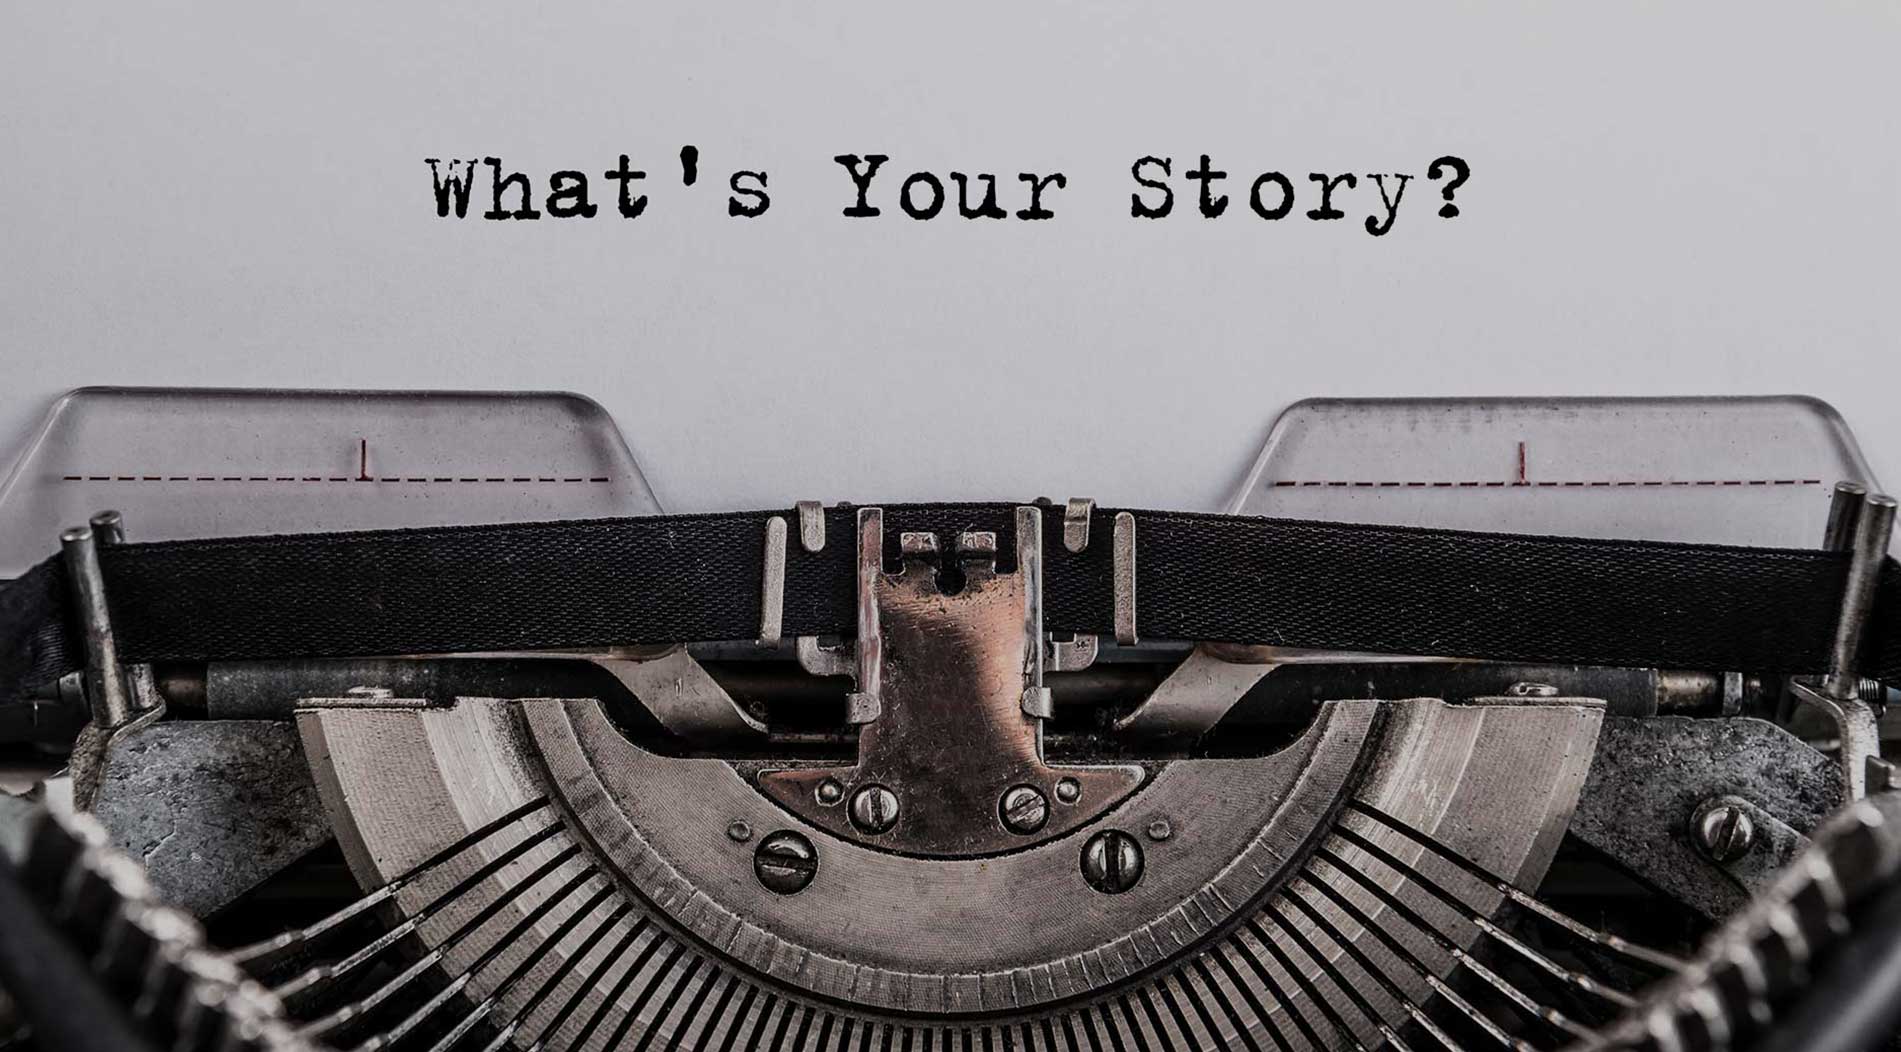 A typewriter has written "What's Your Story?"